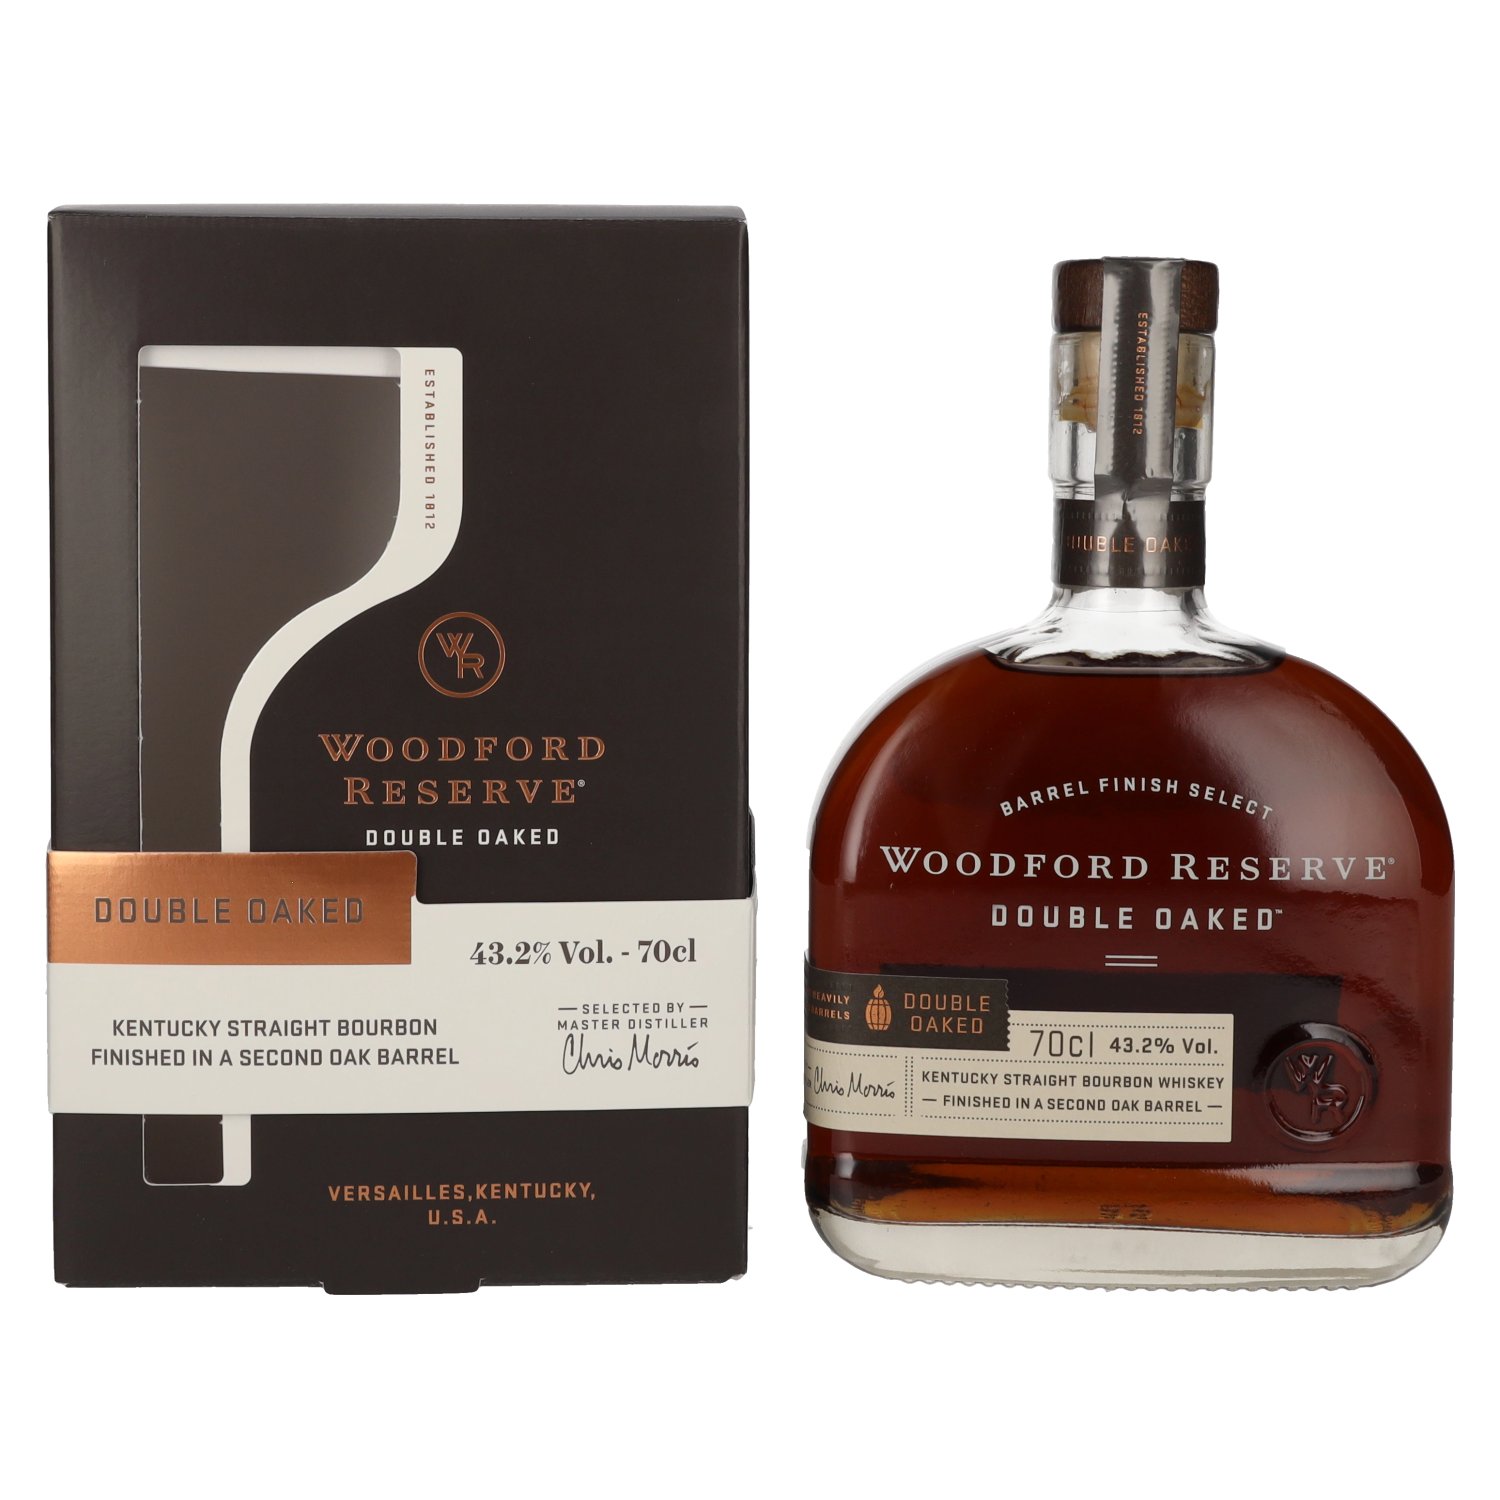 Woodford Reserve DOUBLE OAKED Kentucky Straight Bourbon Whiskey 43,2% Vol.  0,7l in Geschenkbox | Whisky